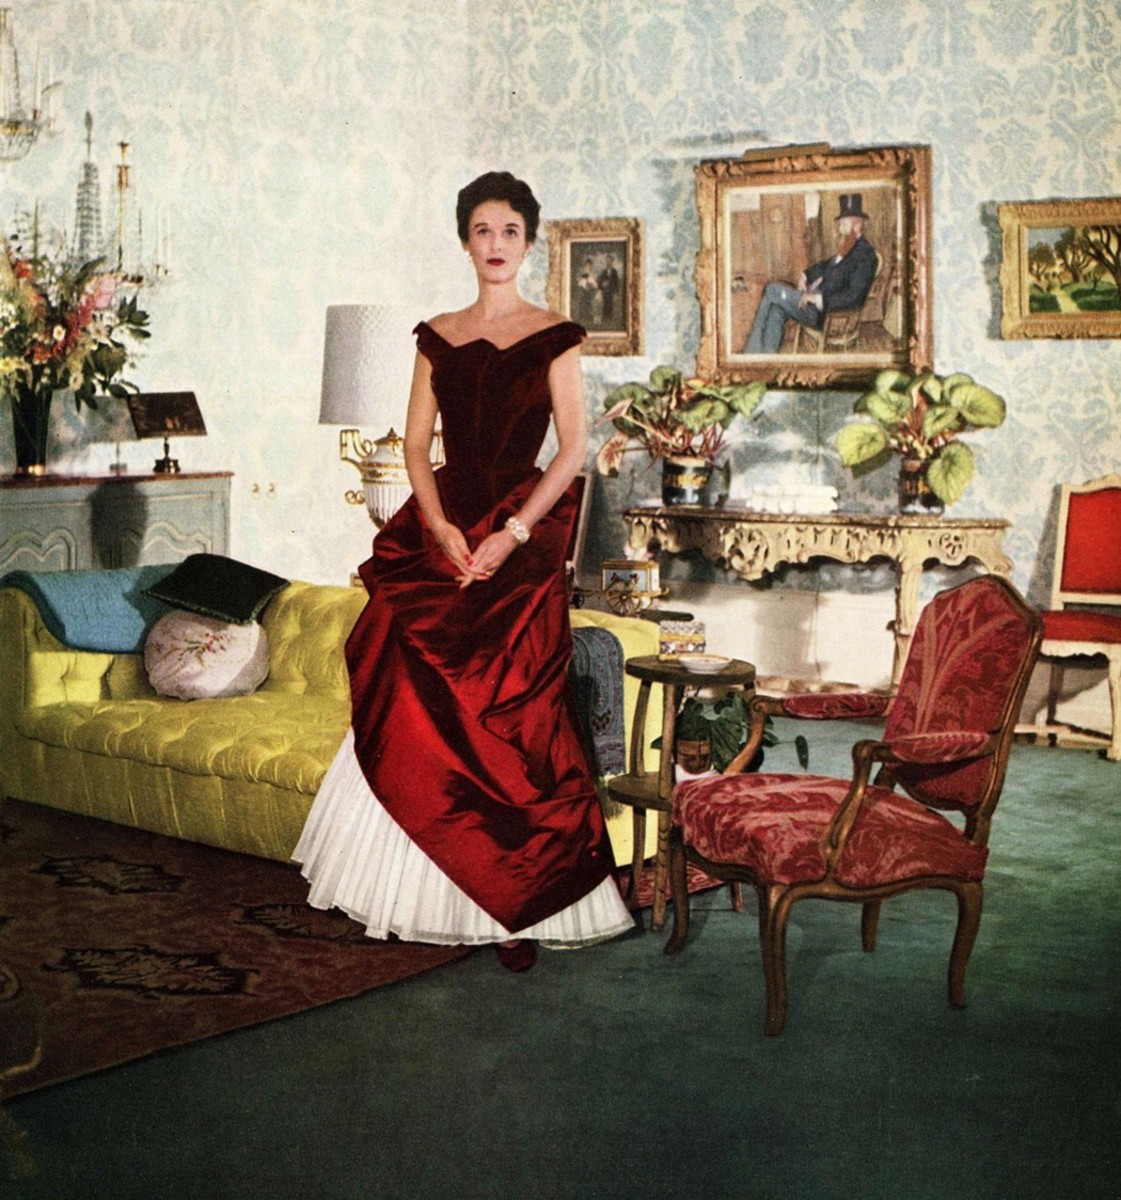 Socialite Babe Paley wearing a crimson James' ball gown, 1950.